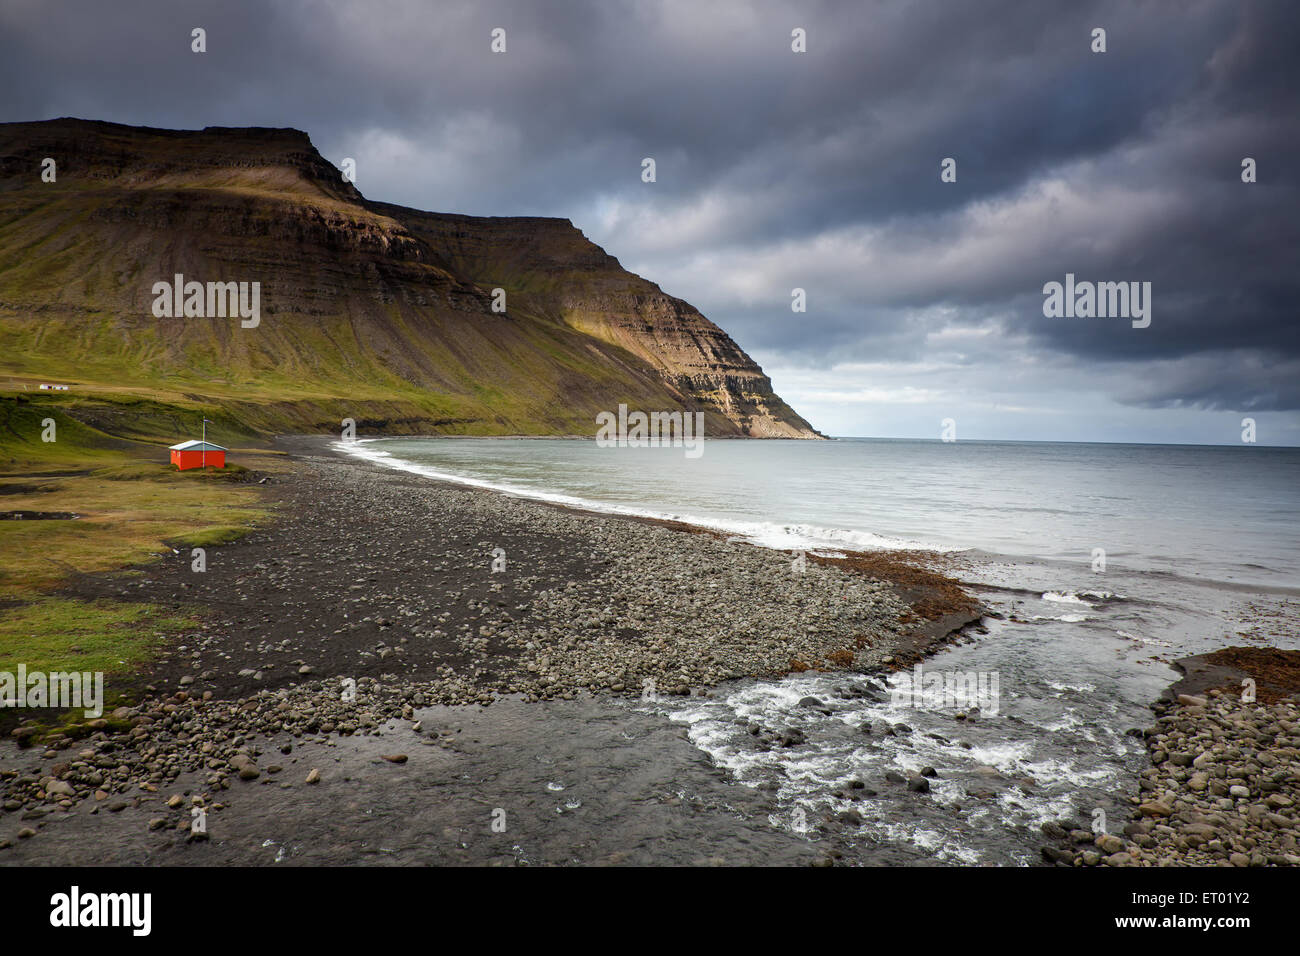 Scenic view of cliffs and ocean, Skalavik, Isafjordur, West Fjords, Iceland Stock Photo